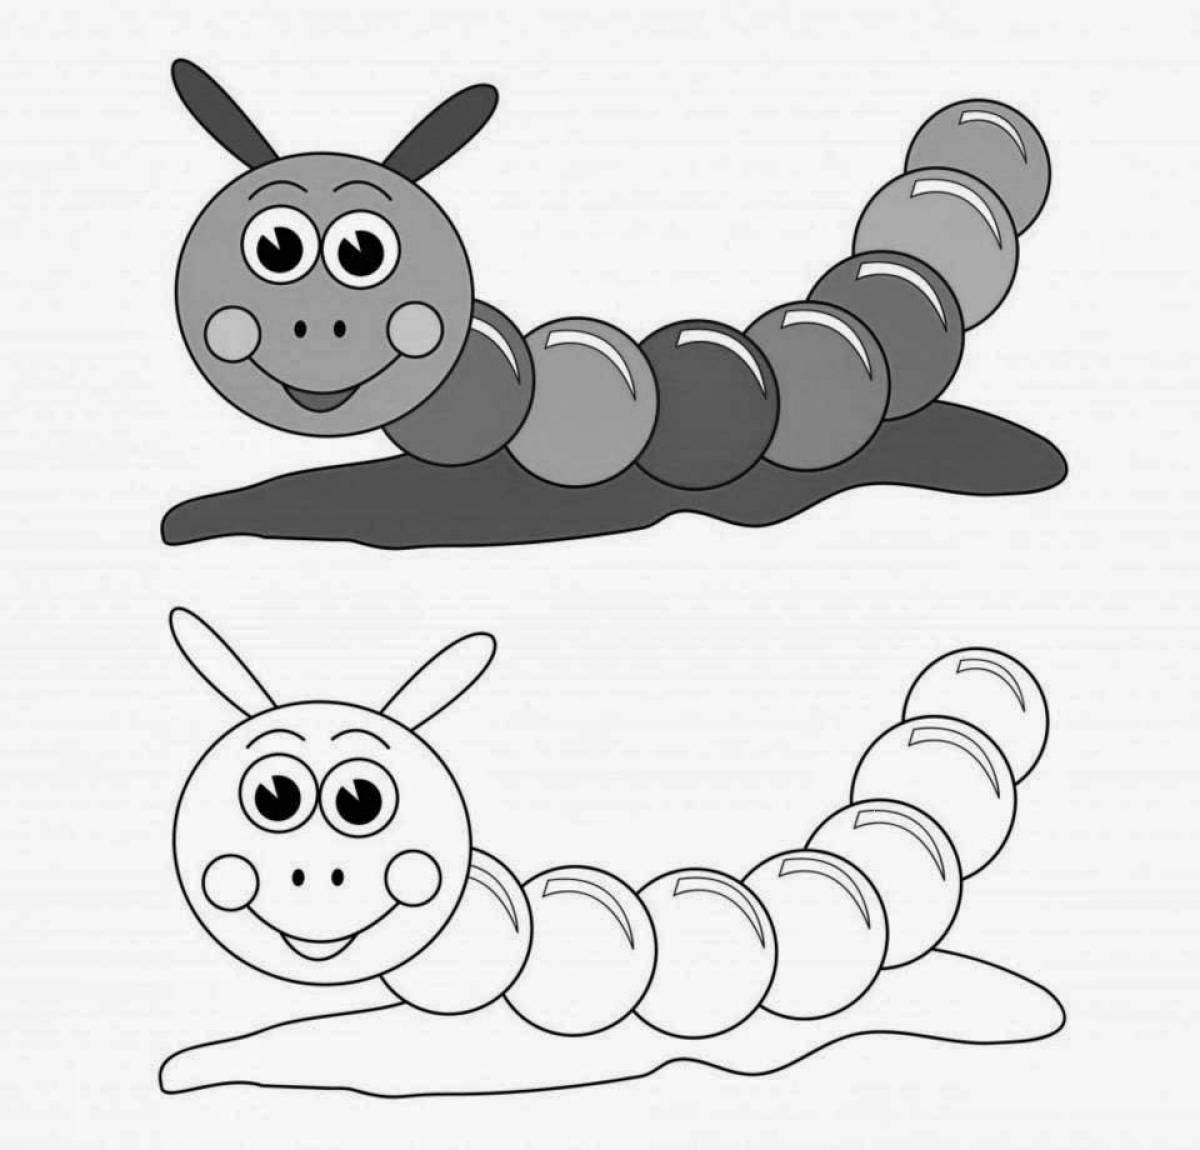 Amazing caterpillar coloring page for little ones